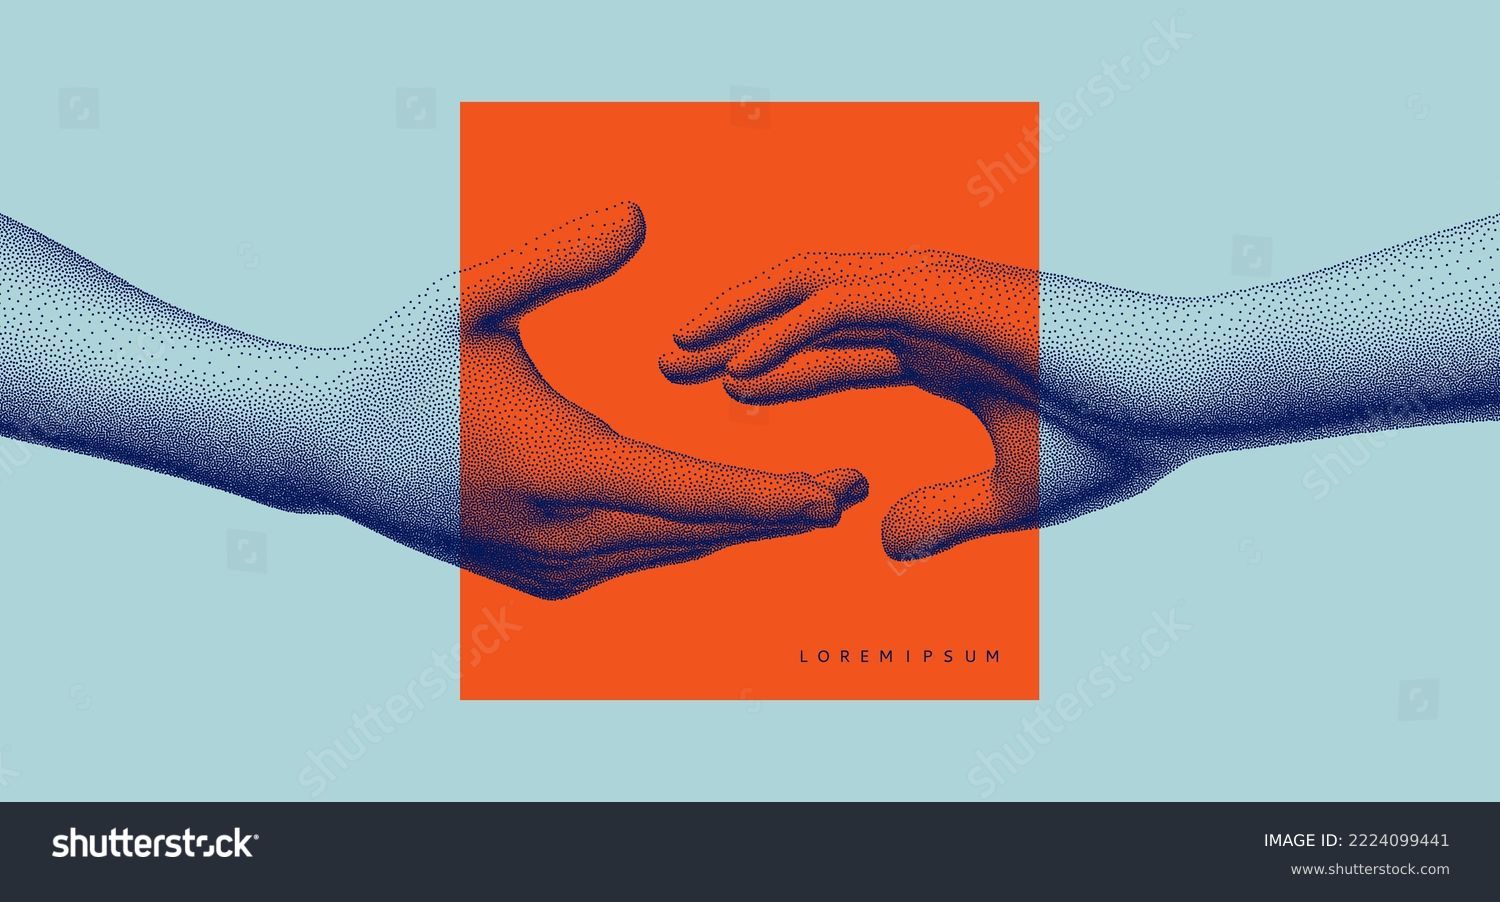 Hands reaching towards each other. Concept of human relation, togetherness or  partnership. 3D vector illustration. Design for banner, flyer, poster, cover or brochure. #2224099441